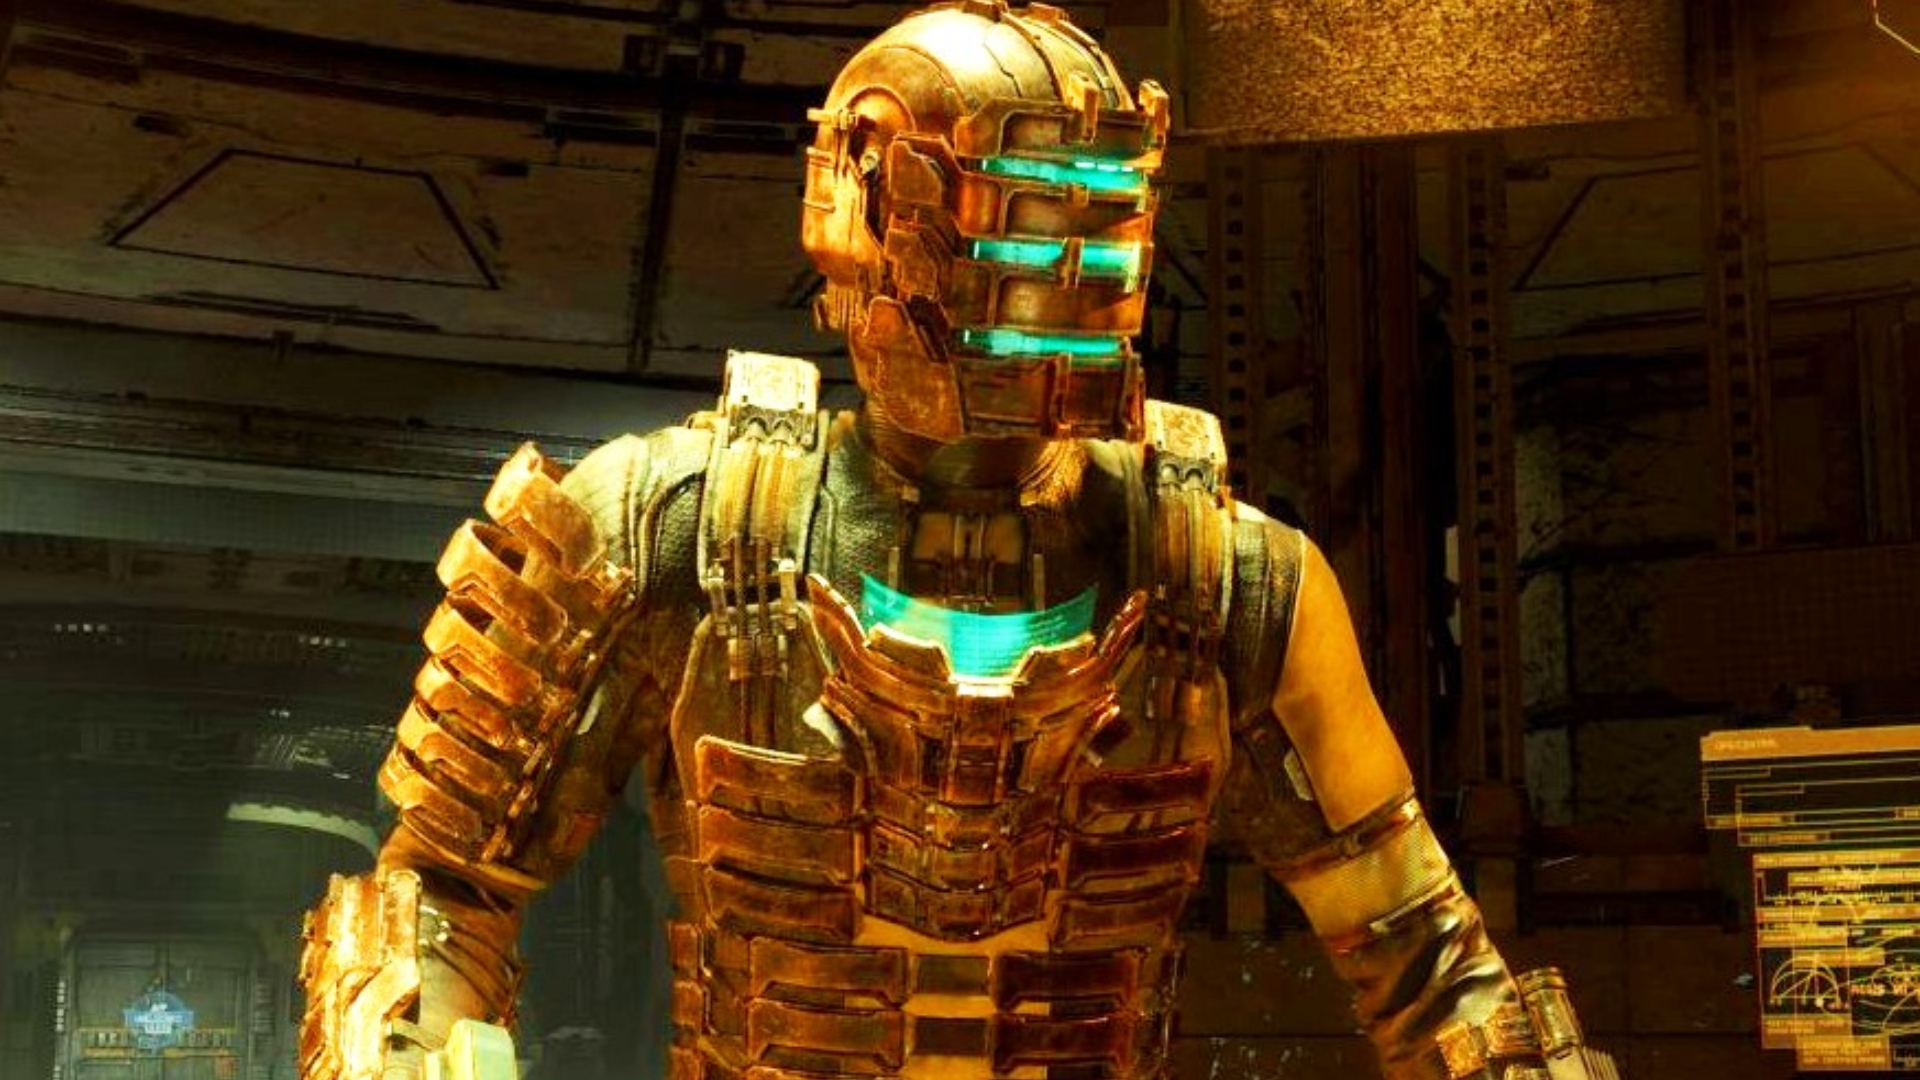 Dead Space on Steam